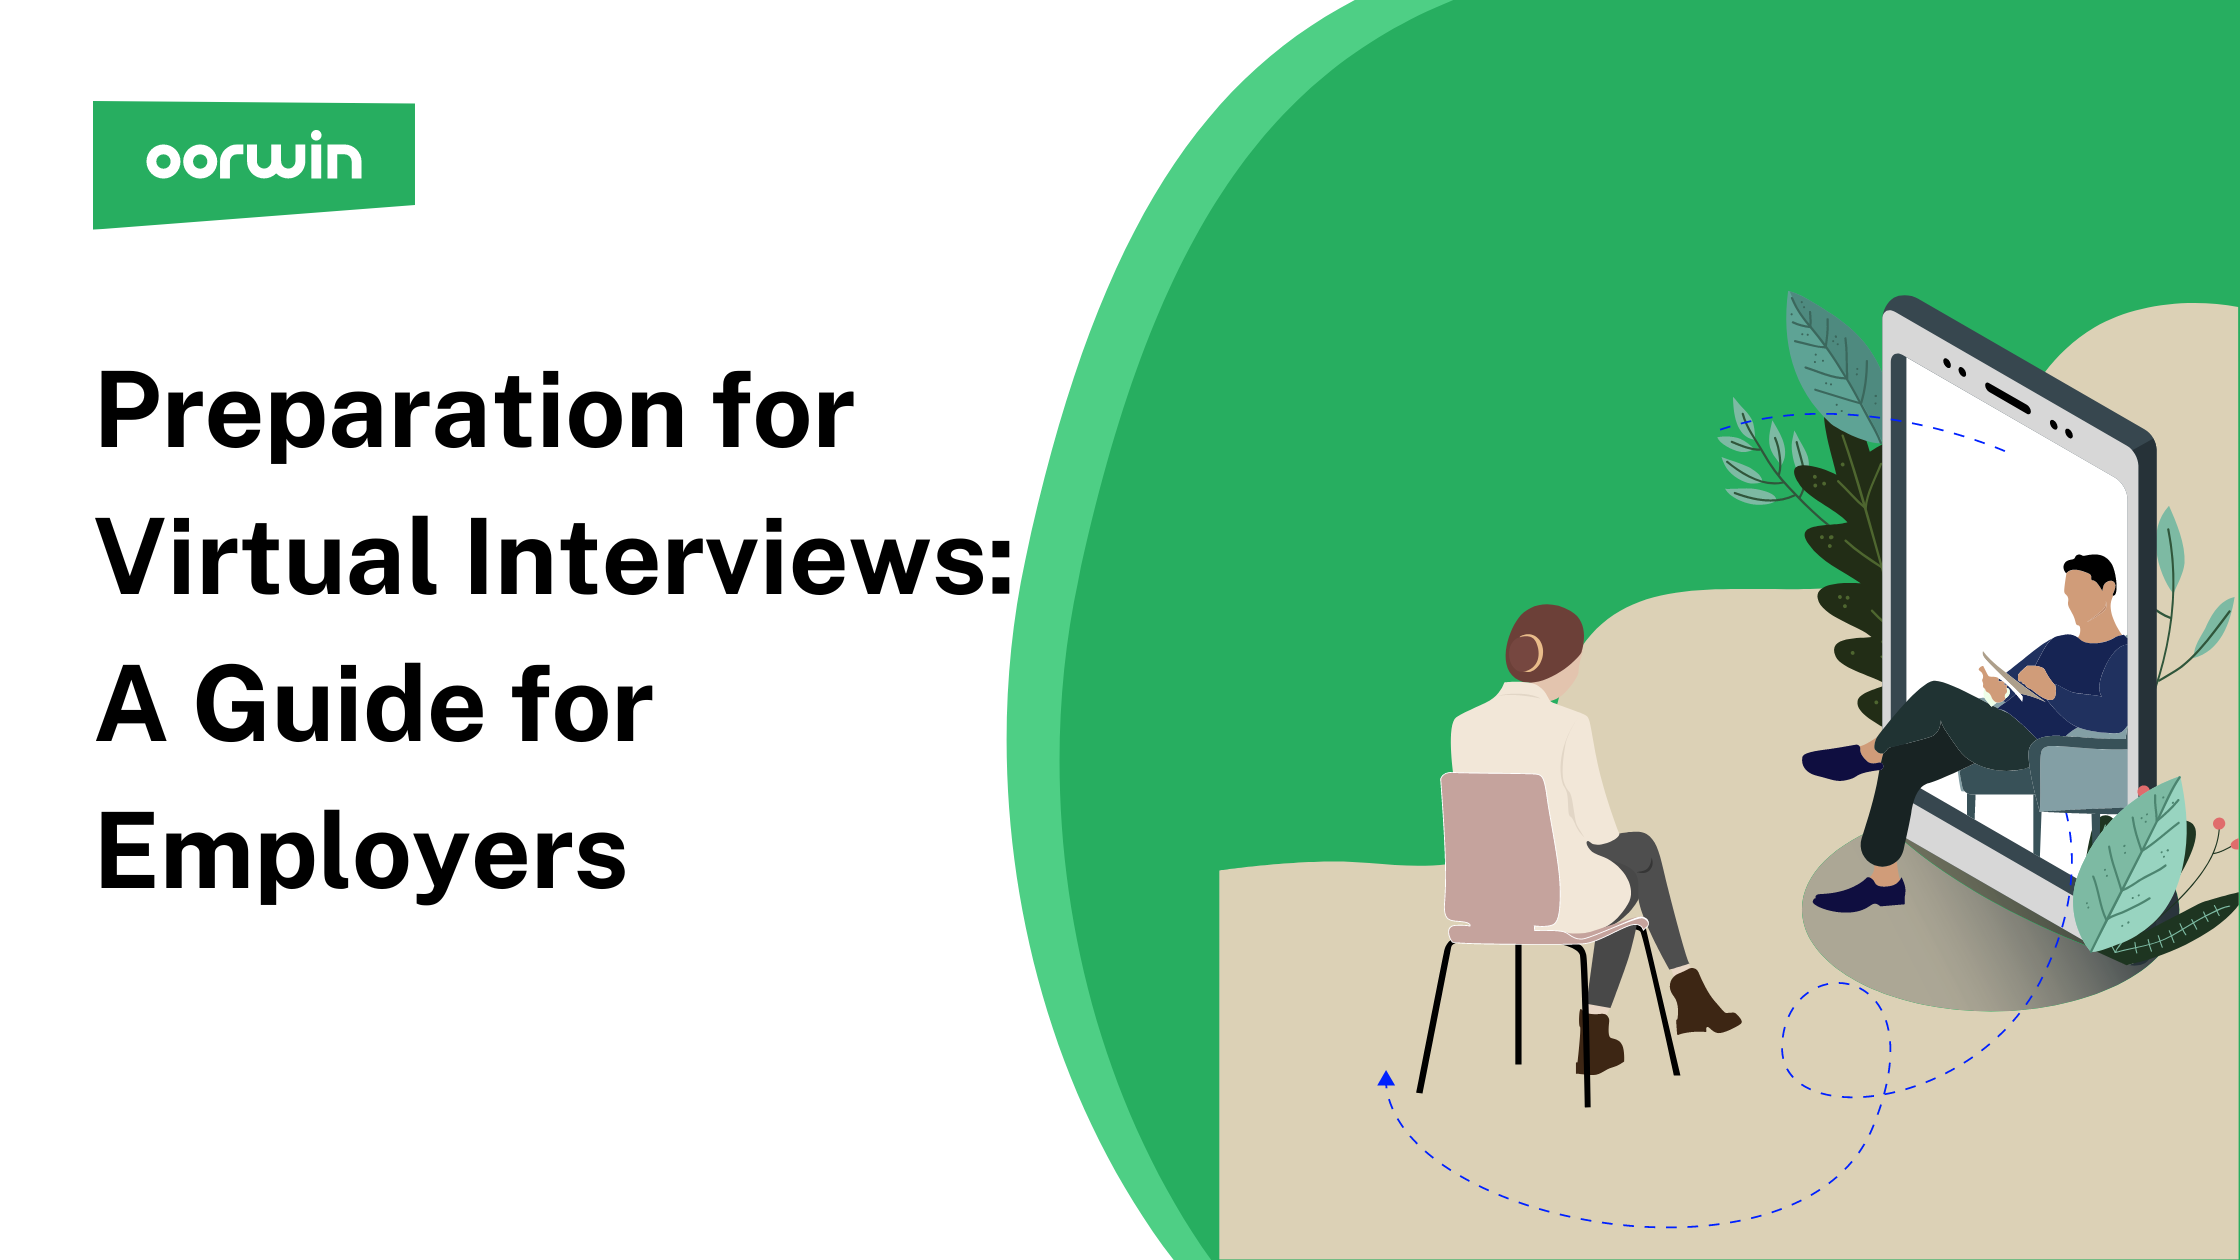 Preparation for Virtual Interviews: A Guide for Employers